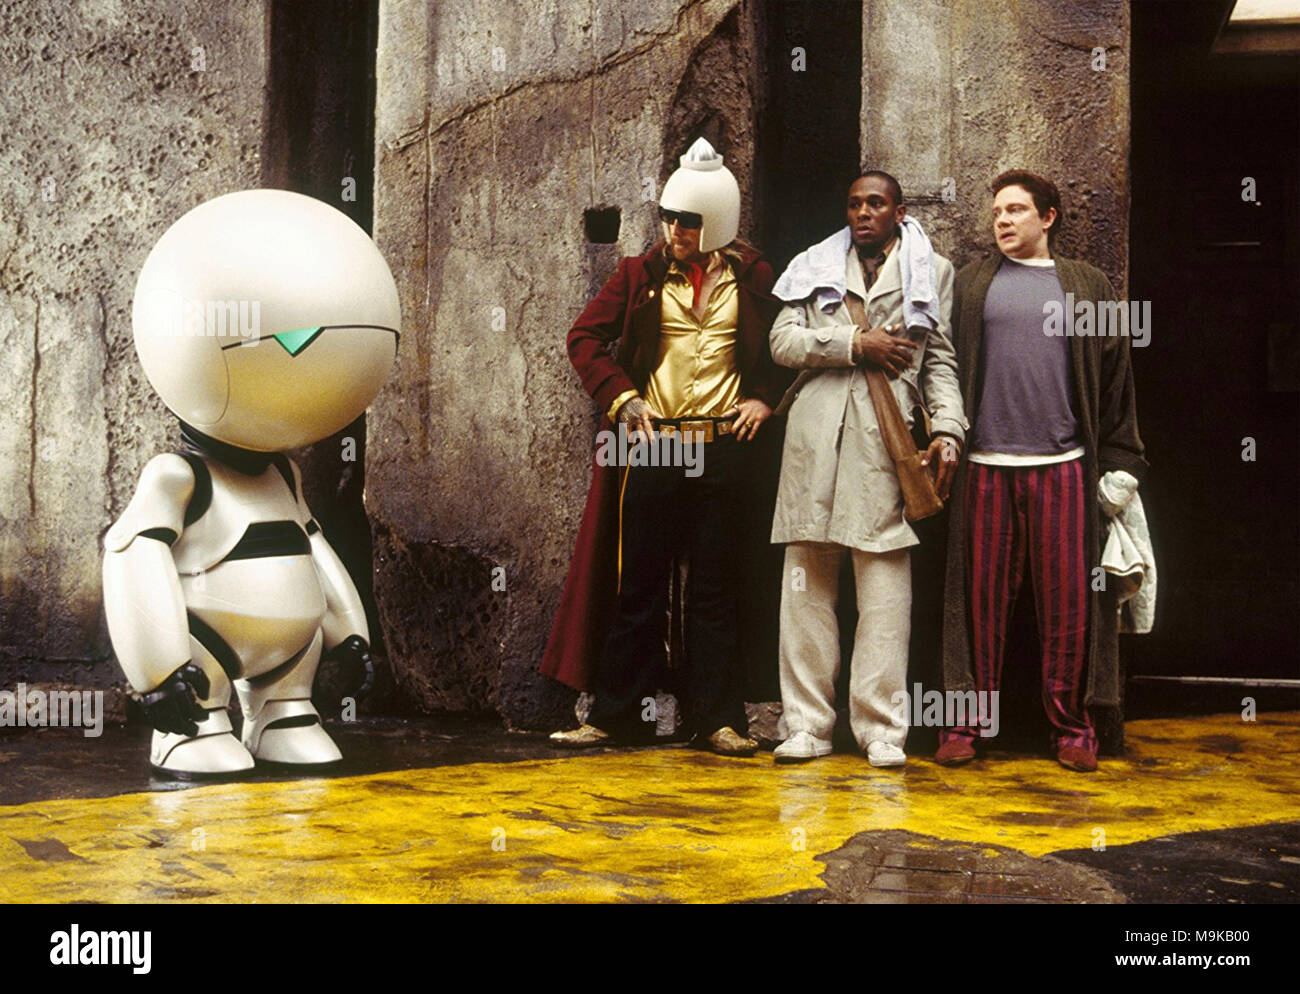 HHGG computer game funny package images - Hitchhiker's Guide to the Galaxy  Photo (28111687) - Fanpop